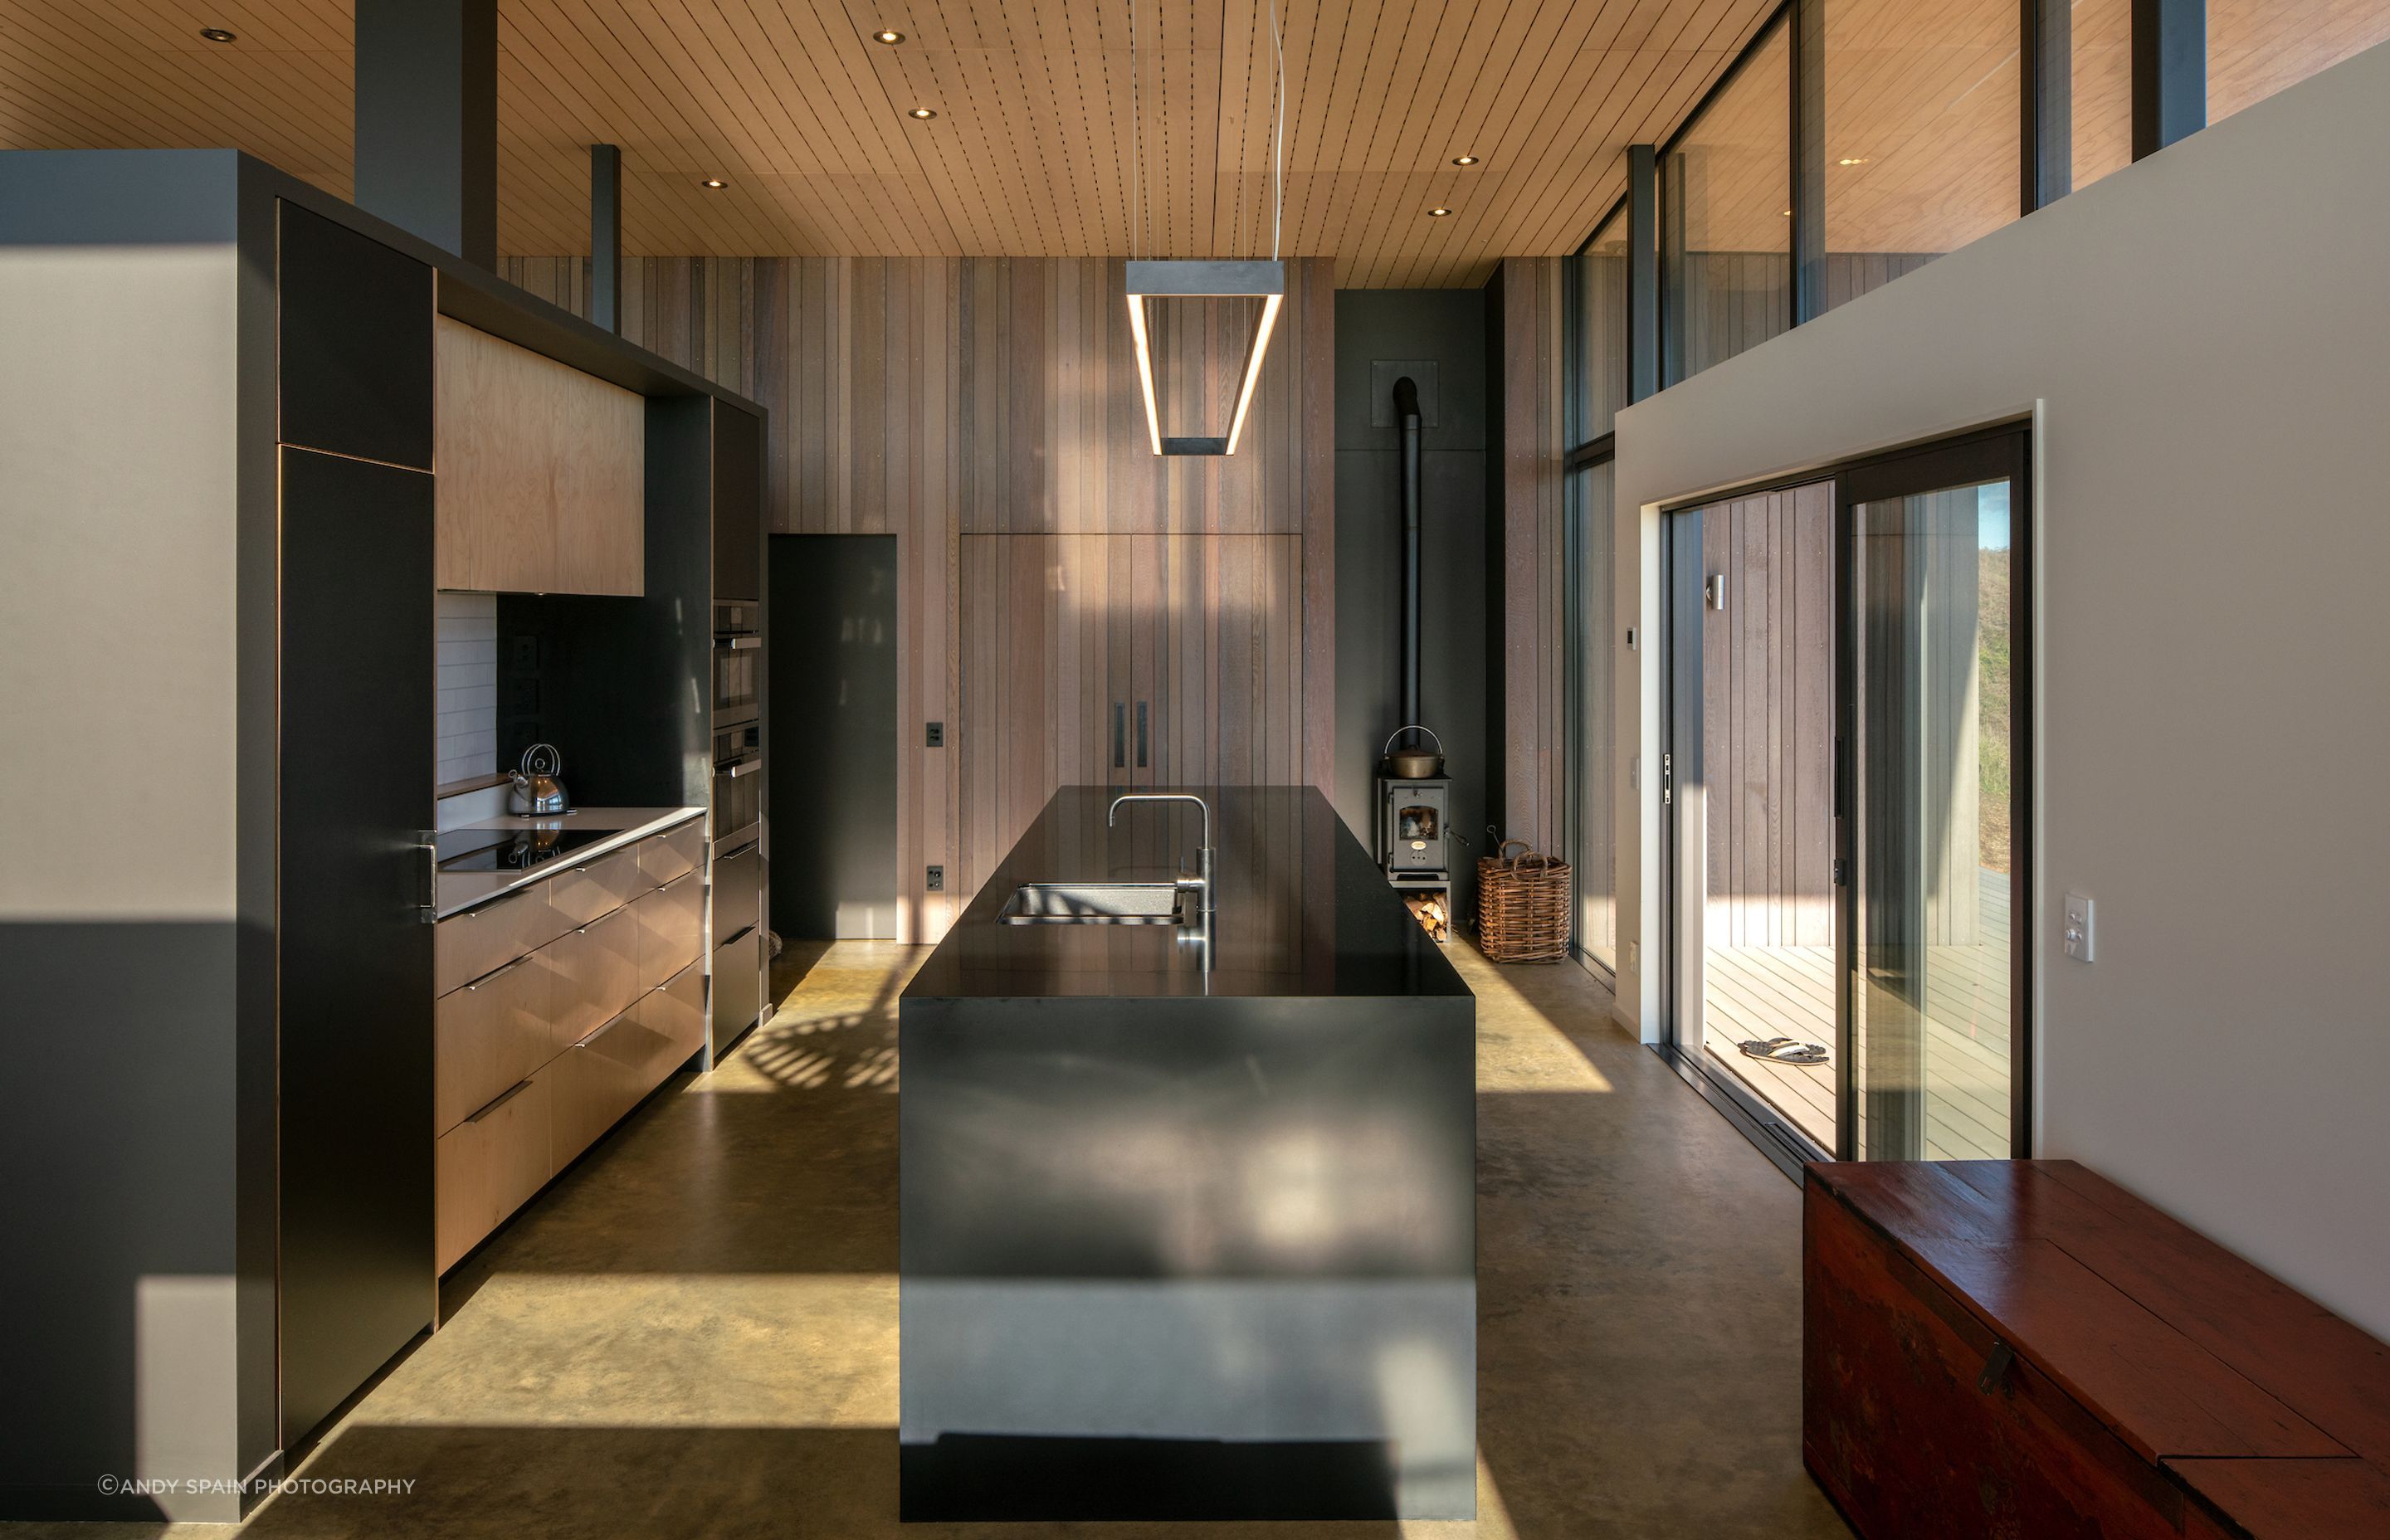 The kitchen in Te Horo Beach House by First Light Studio has an over-benchtop LED light feature and ceiling spotlights to create a dramatic atmosphere.